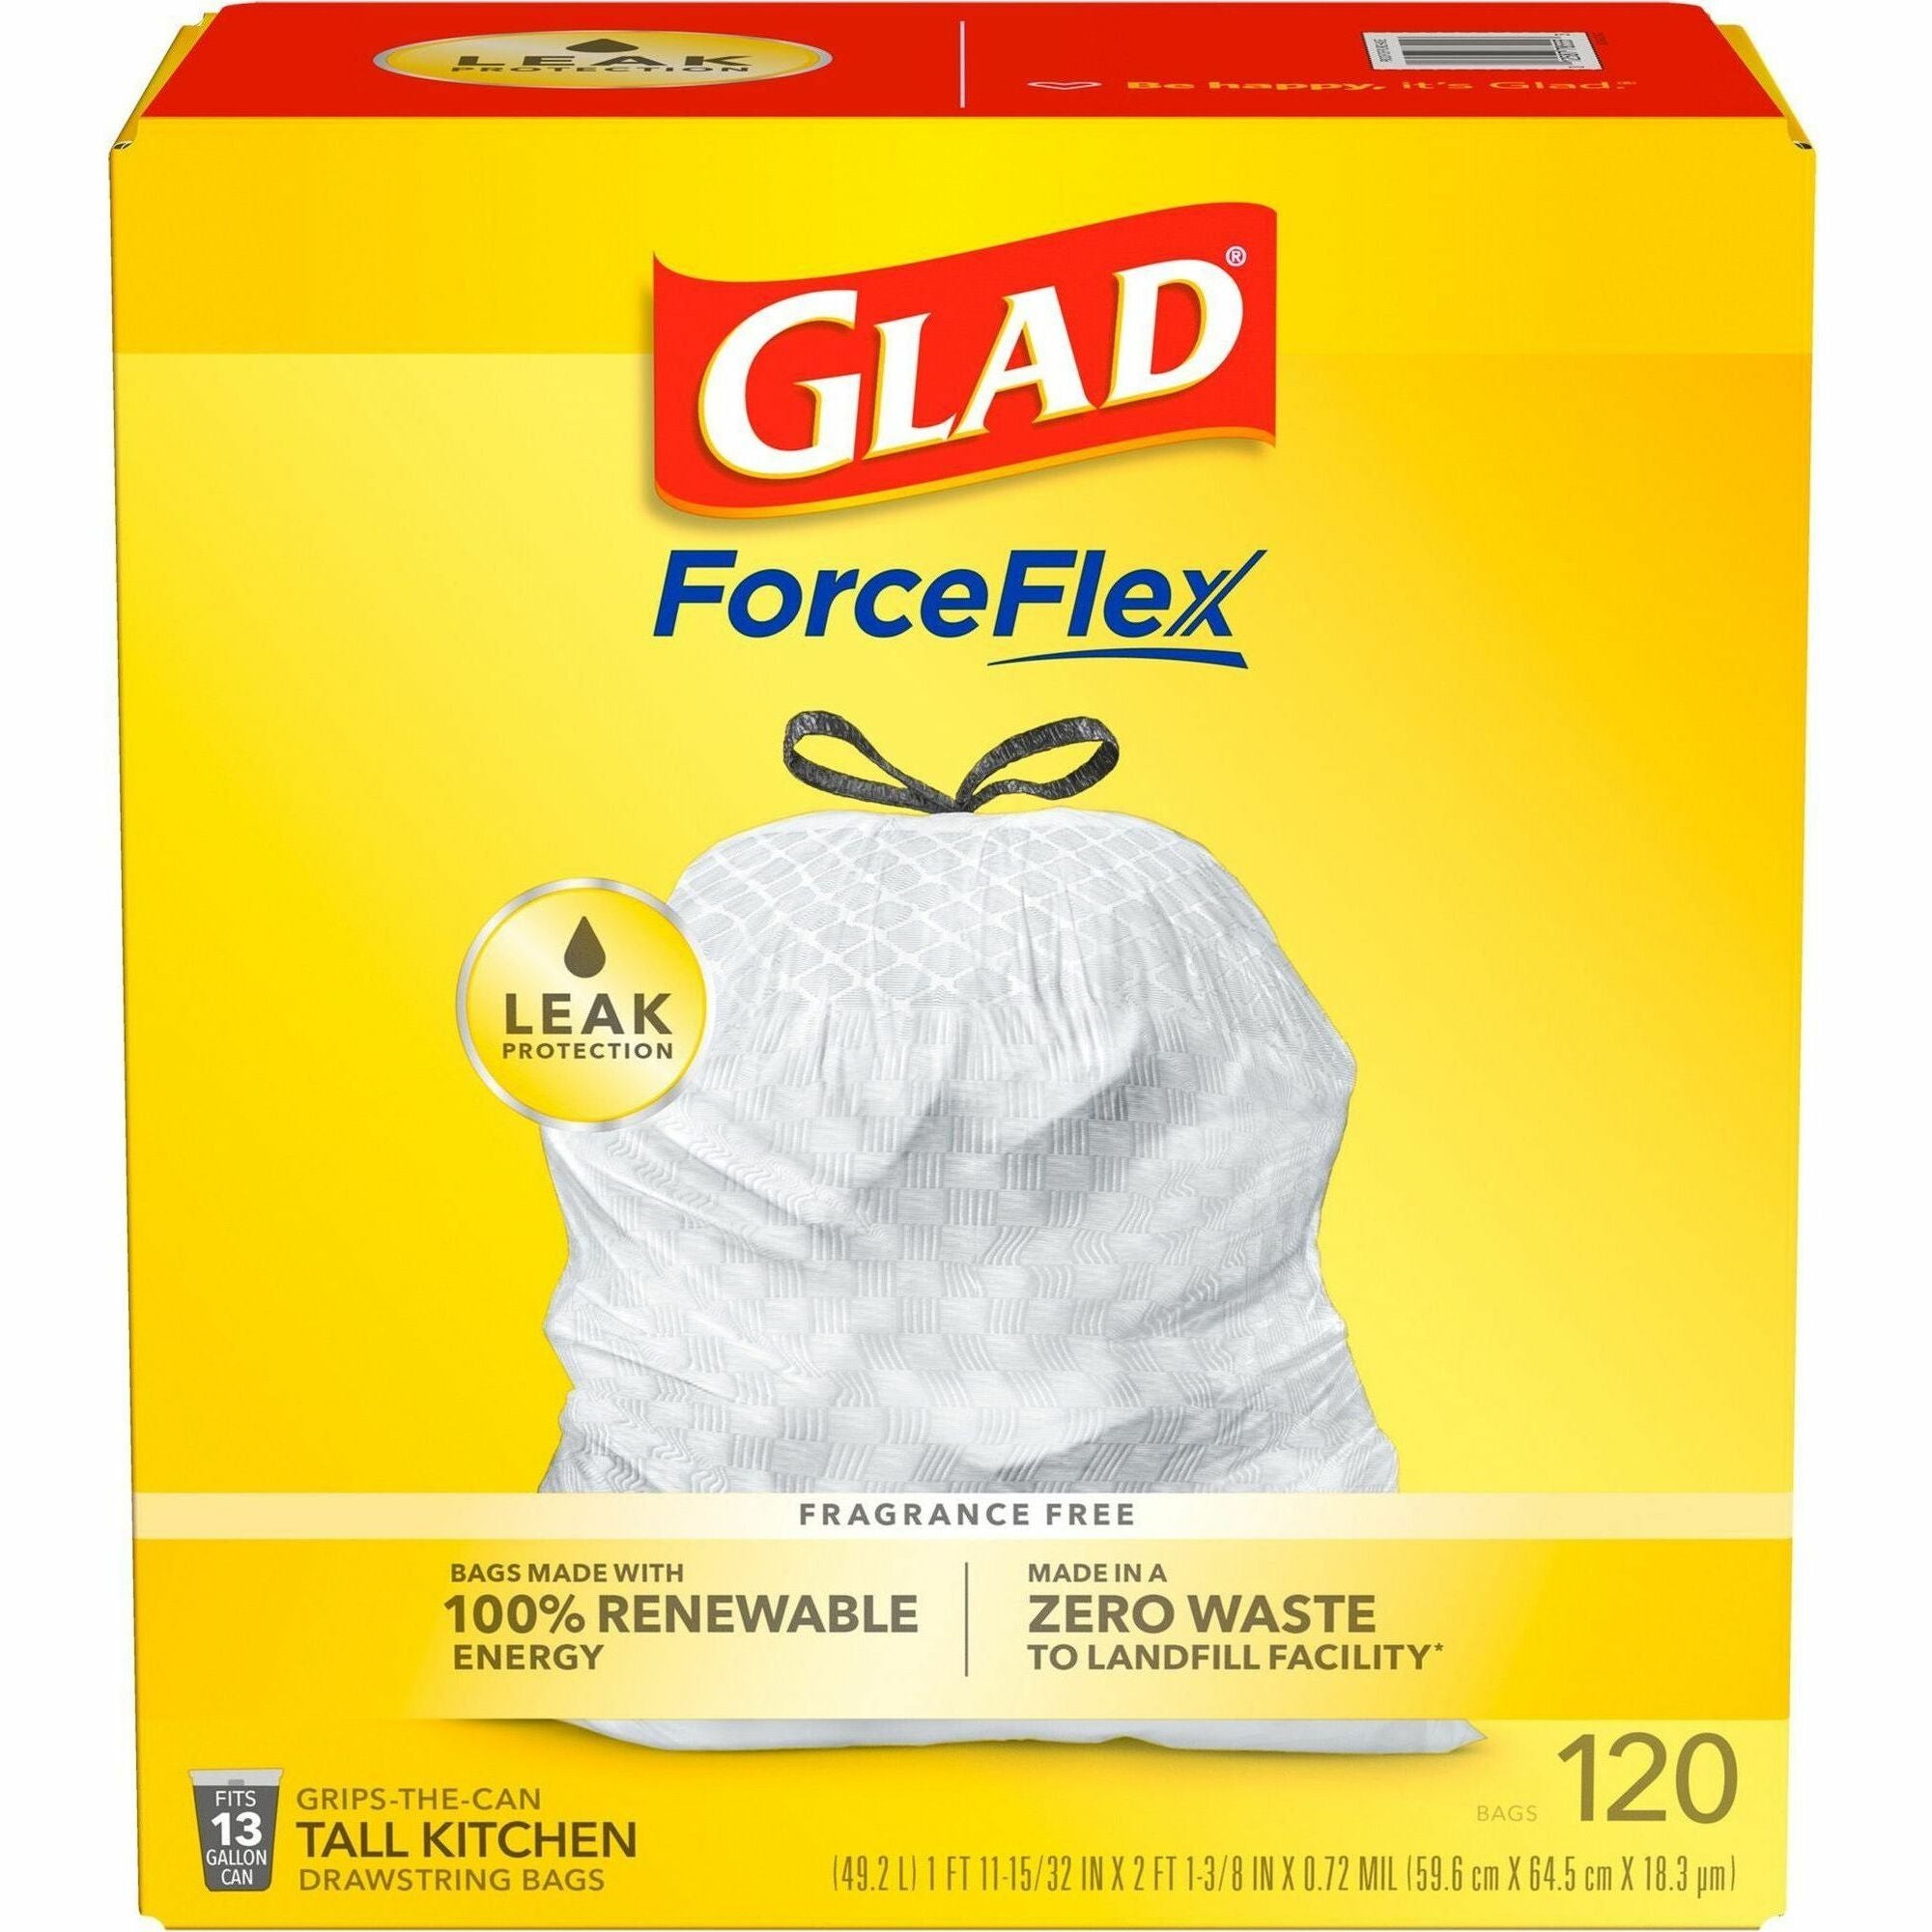 Glad ForceFlex Tall Kitchen Drawstring Trash Bags - 13 gal Capacity - 9 mil (229 Micron) Thickness - Drawstring Closure - White - Plastic - 135/Pallet - 120 Per Box - Home, Breakroom, Day Care, Kitchen, Garbage - 1